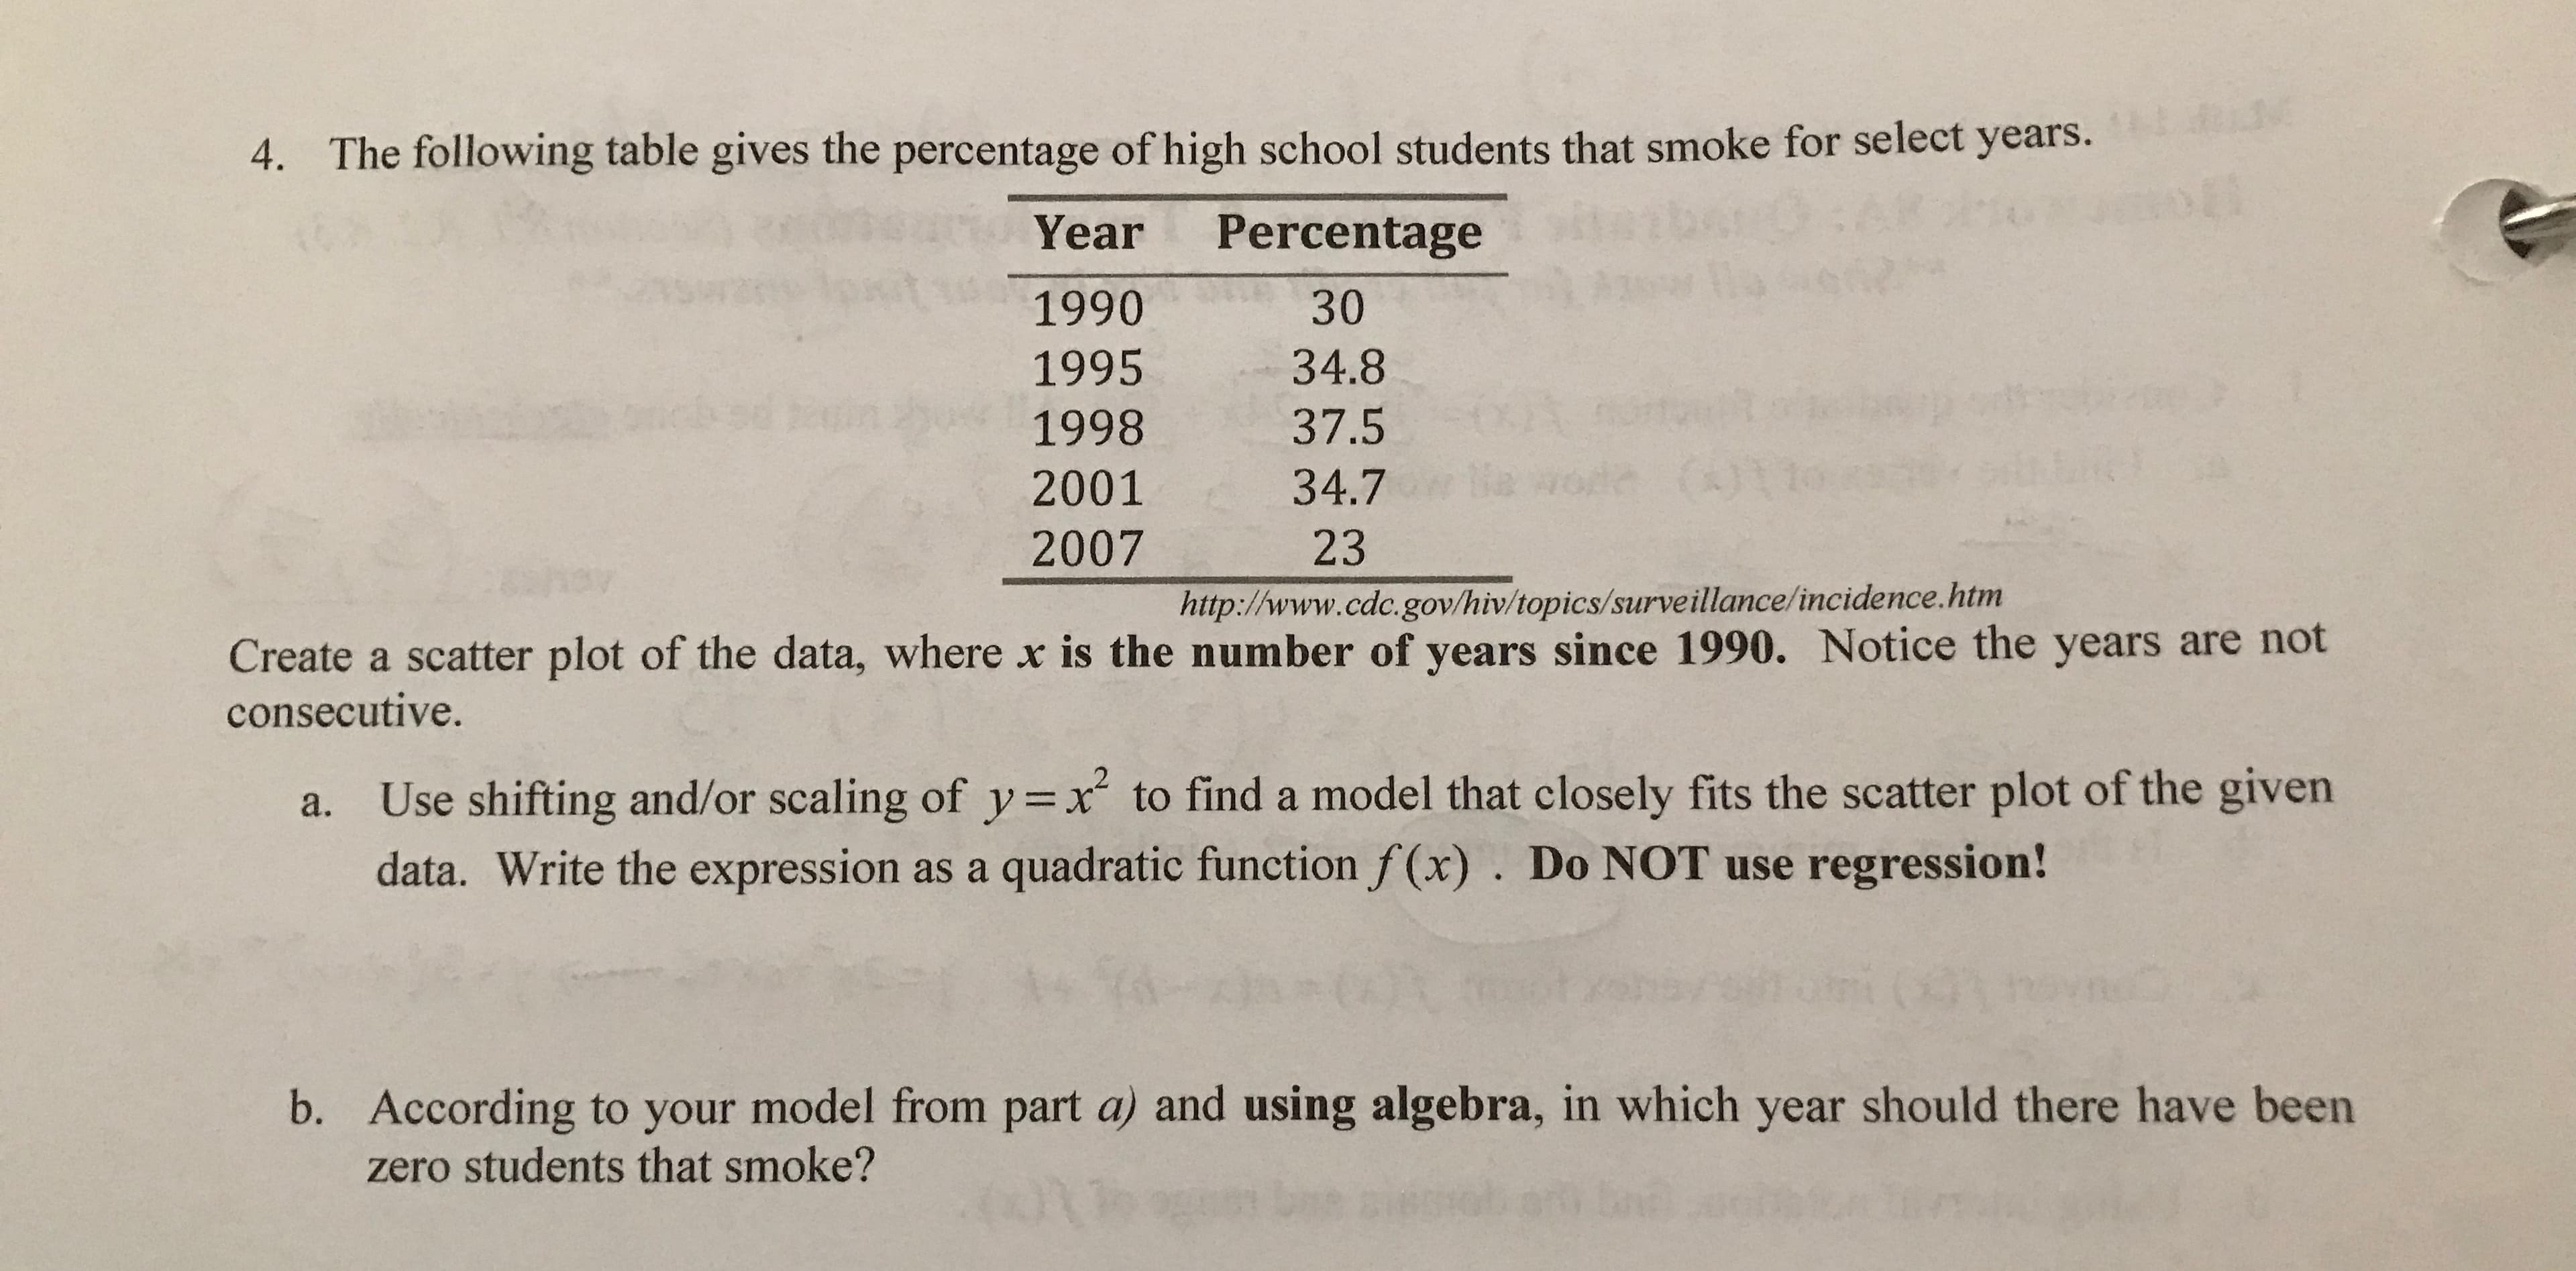 The following table gives the percentage of high school students that smoke for select years.
4.
t3:
Year
Percentage
1990
30
1995
34.8
37.5
1998
(01
e
de
34.7
2001
2007
23
http://www.cdc. gov/hiv/topics/surveillance/incidence.htm
Create a scatter plot of the data, where x is the number of years since 1990. Notice the years are not
consecutive.
Use shifting and/or scaling of y=x to find a model that closely fits the scatter plot of the given
data. Write the expression as a quadratic function f(x). Do NOT use regression!
a.
b. According to your model from part a) and using algebra, in which year should there have been
zero students that smoke?
ni
